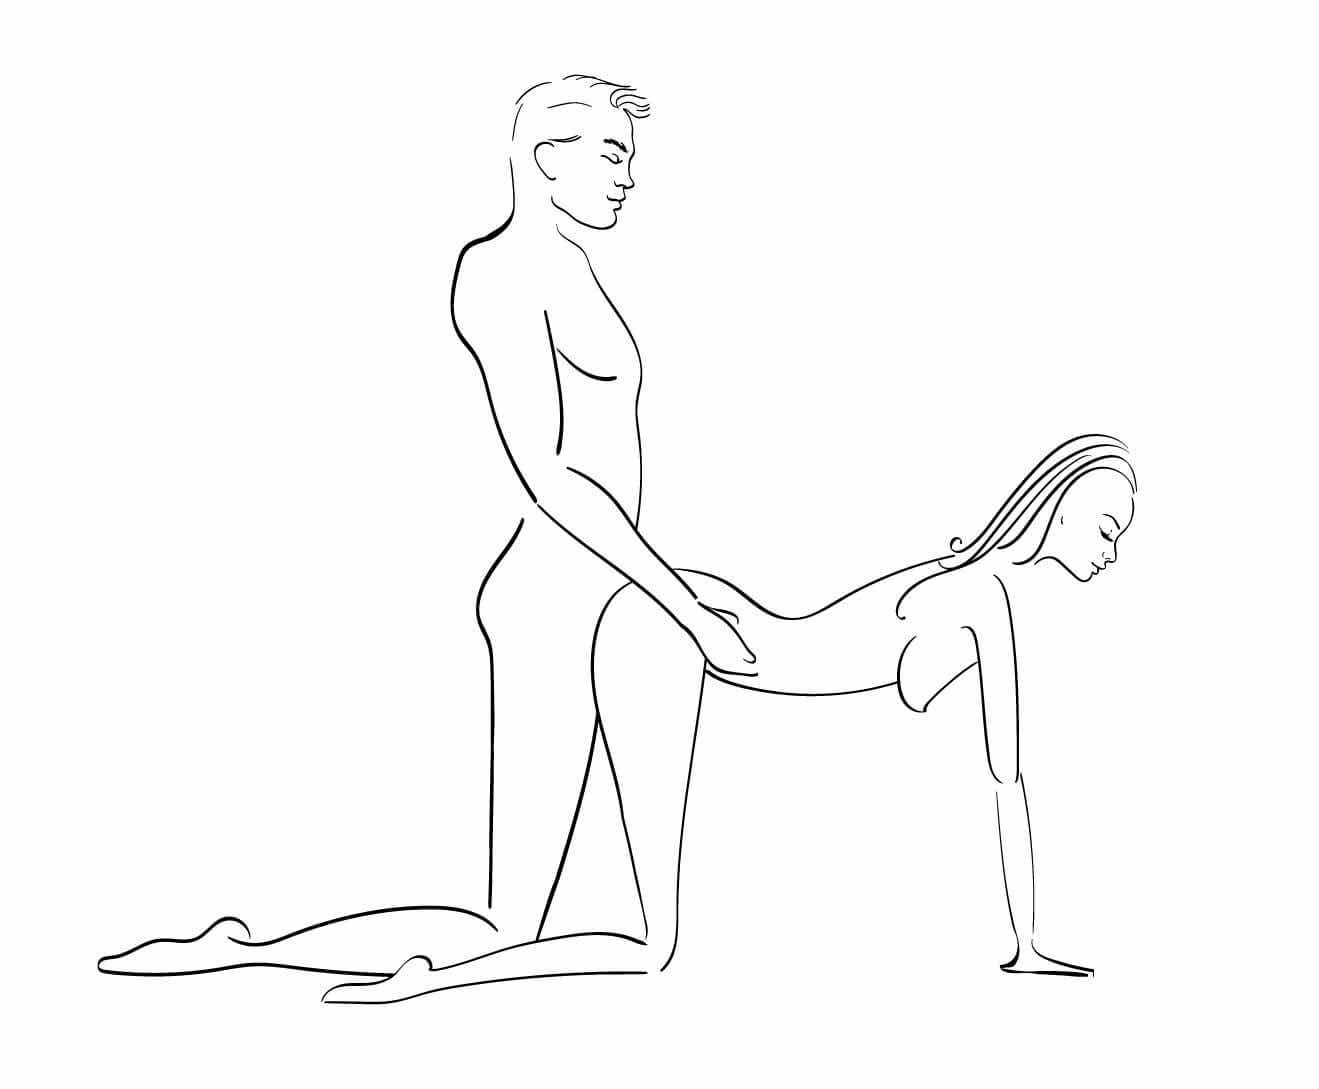 A man and woman having doggy style sex.